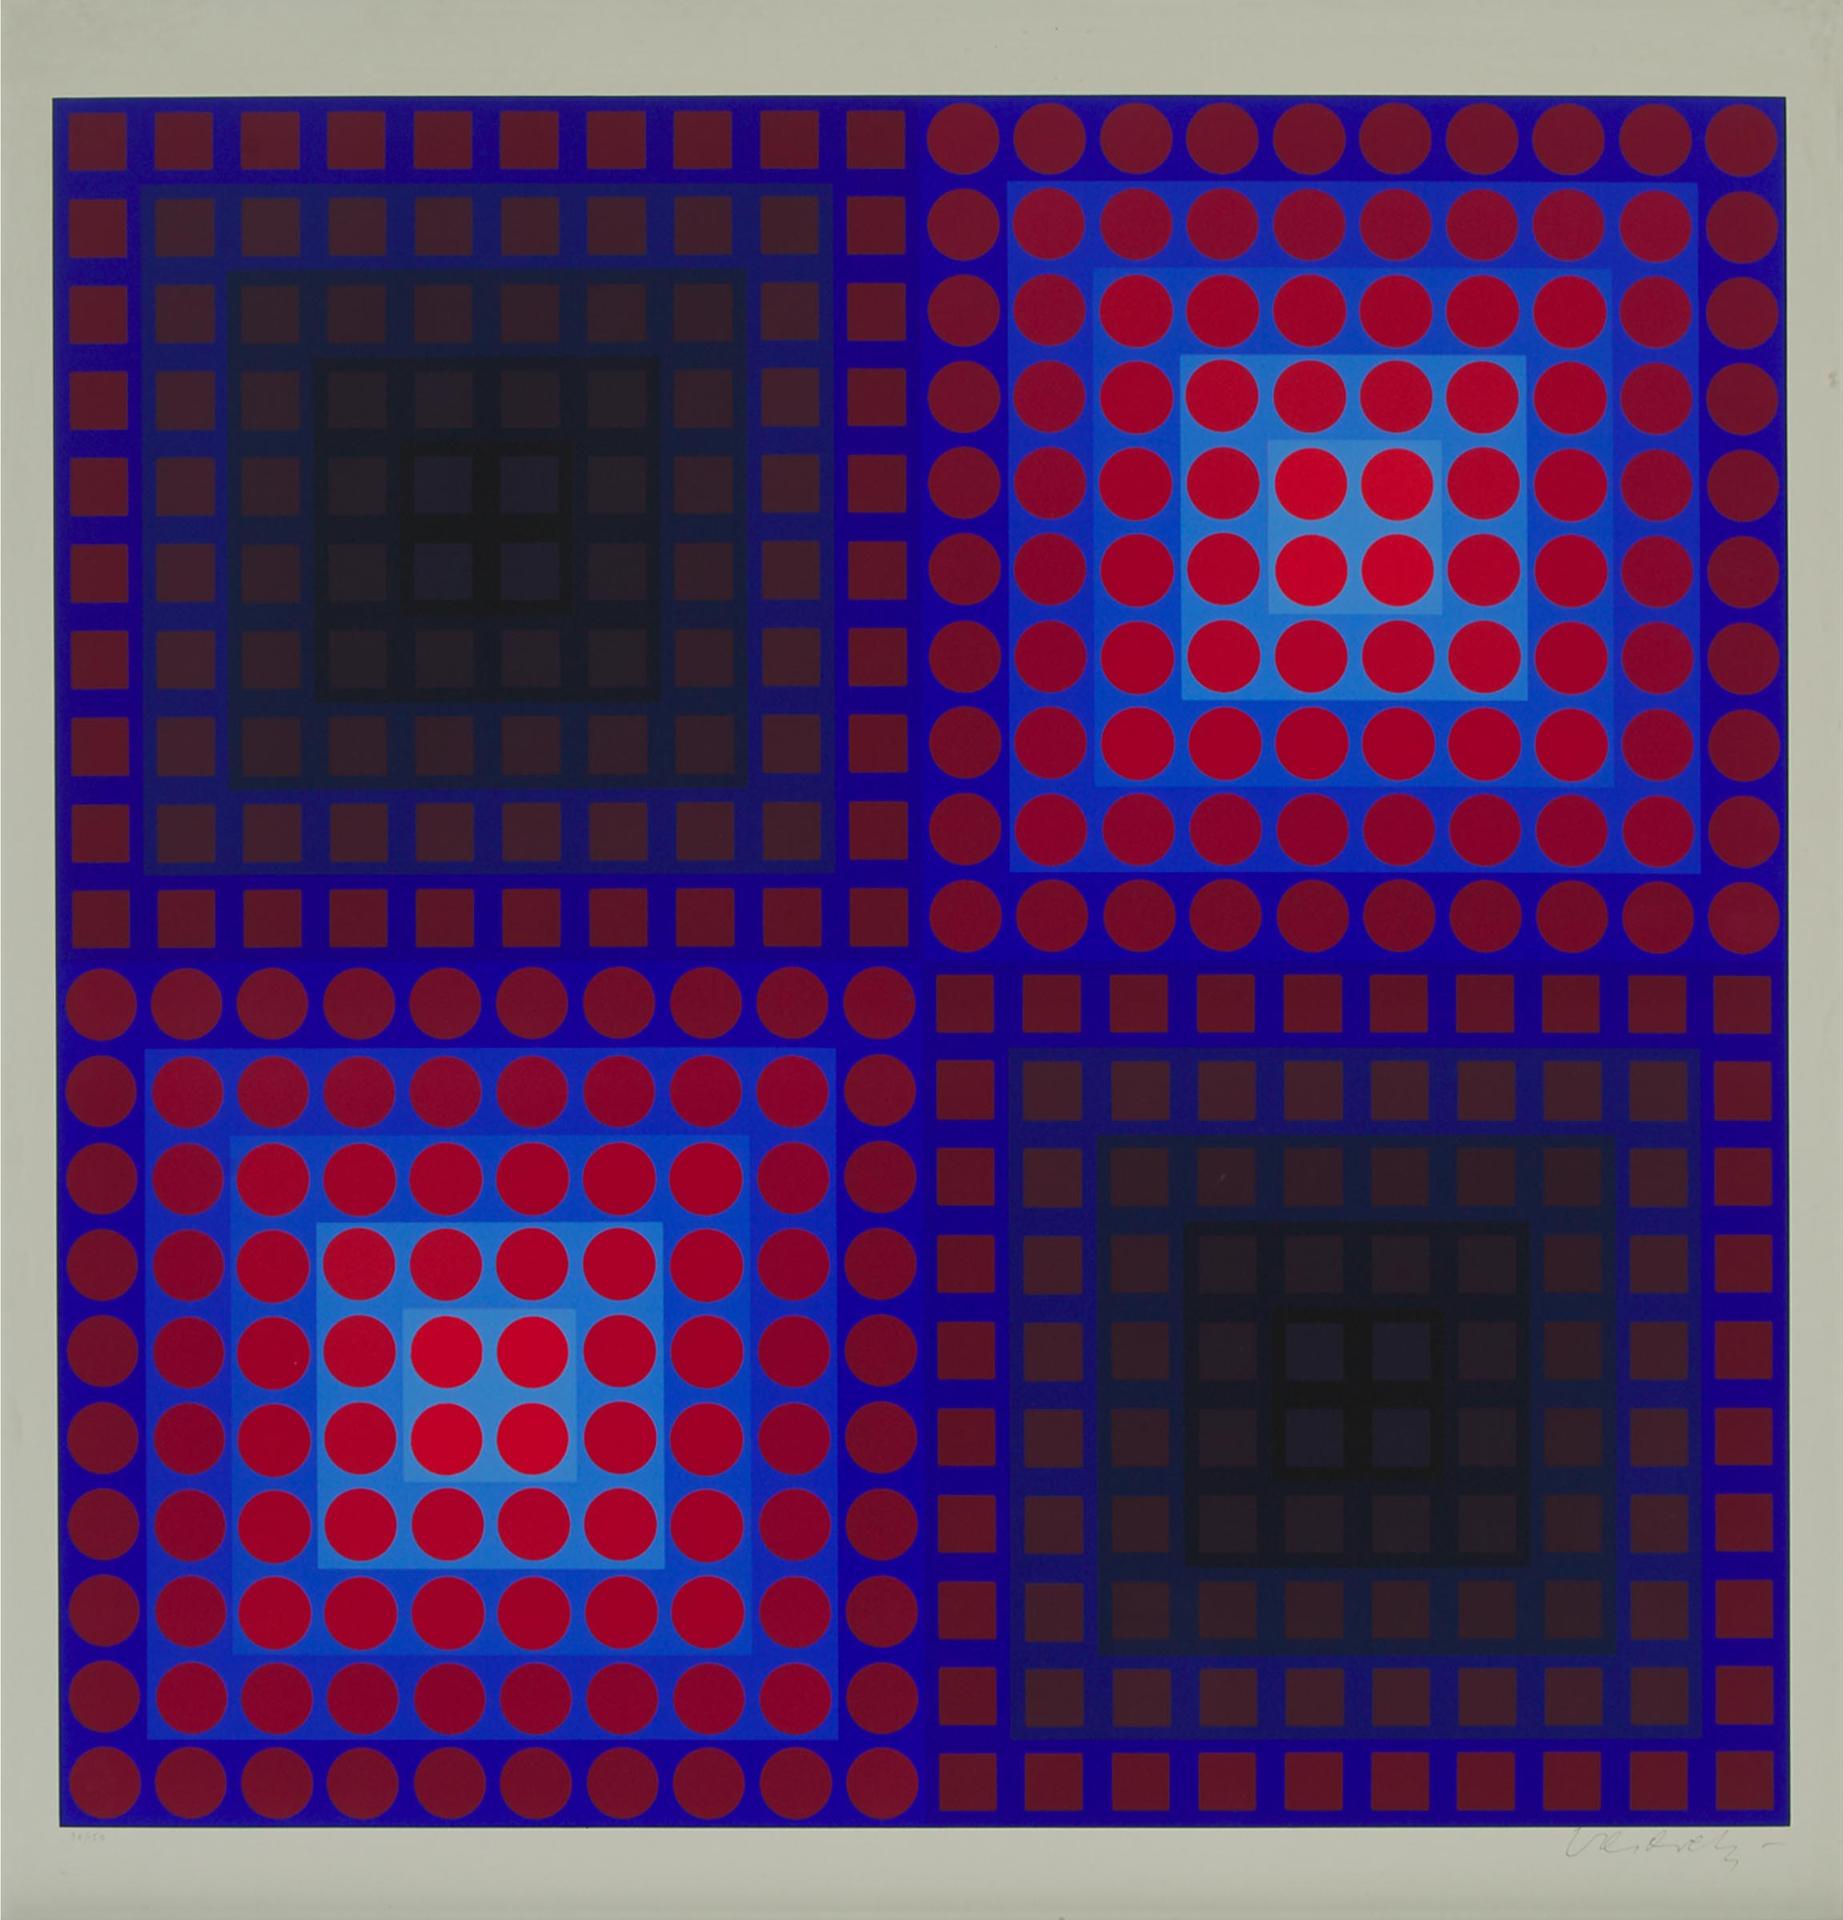 Victor Vasarely (1906-1997) - Untitled (From Permutations), 1968